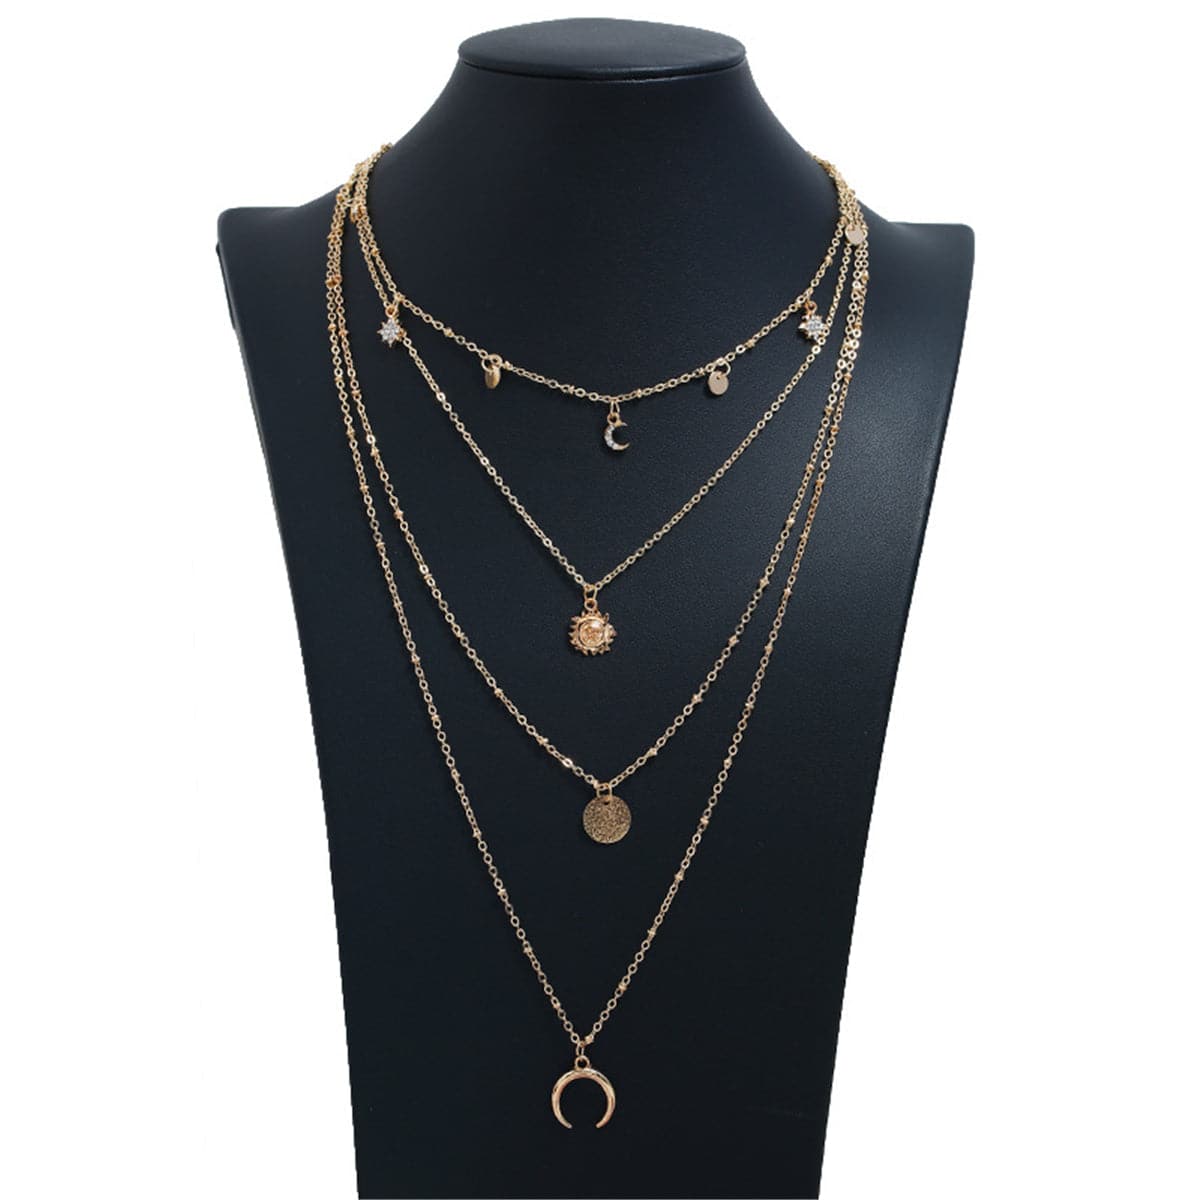 Cubic Zirconia & 18K Gold-Plated Celestial Layered Necklace